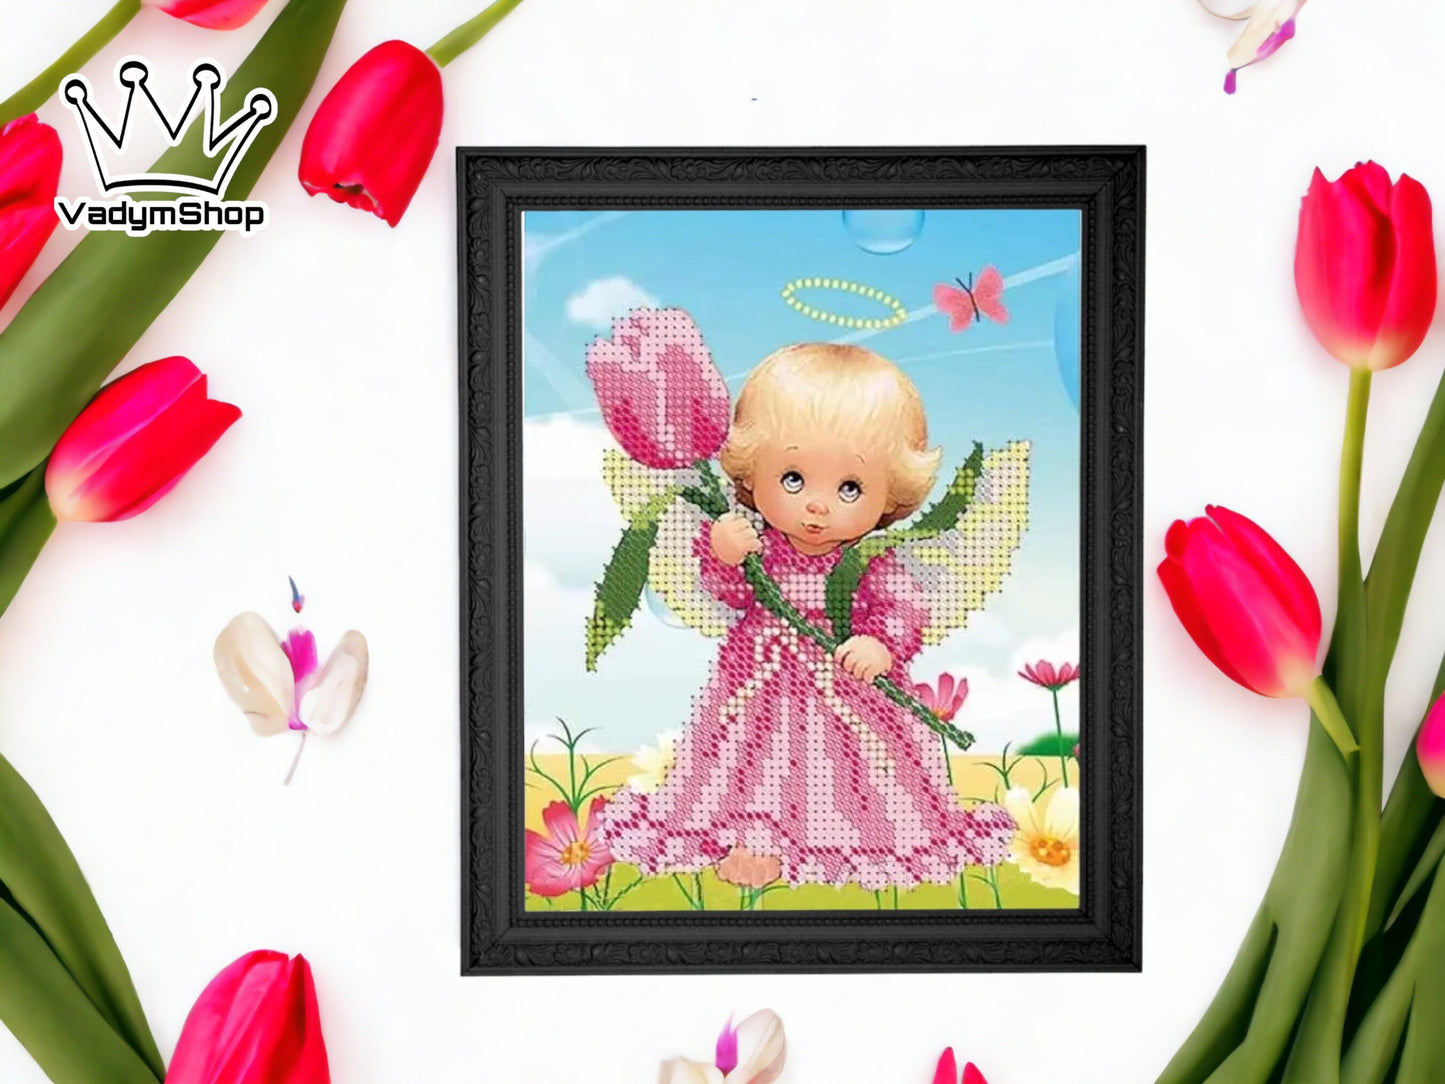 Small Bead embroidery kit "Аngel with tulip". Size: Size: 5.1-7.1 in (13-18cm) - VadymShop